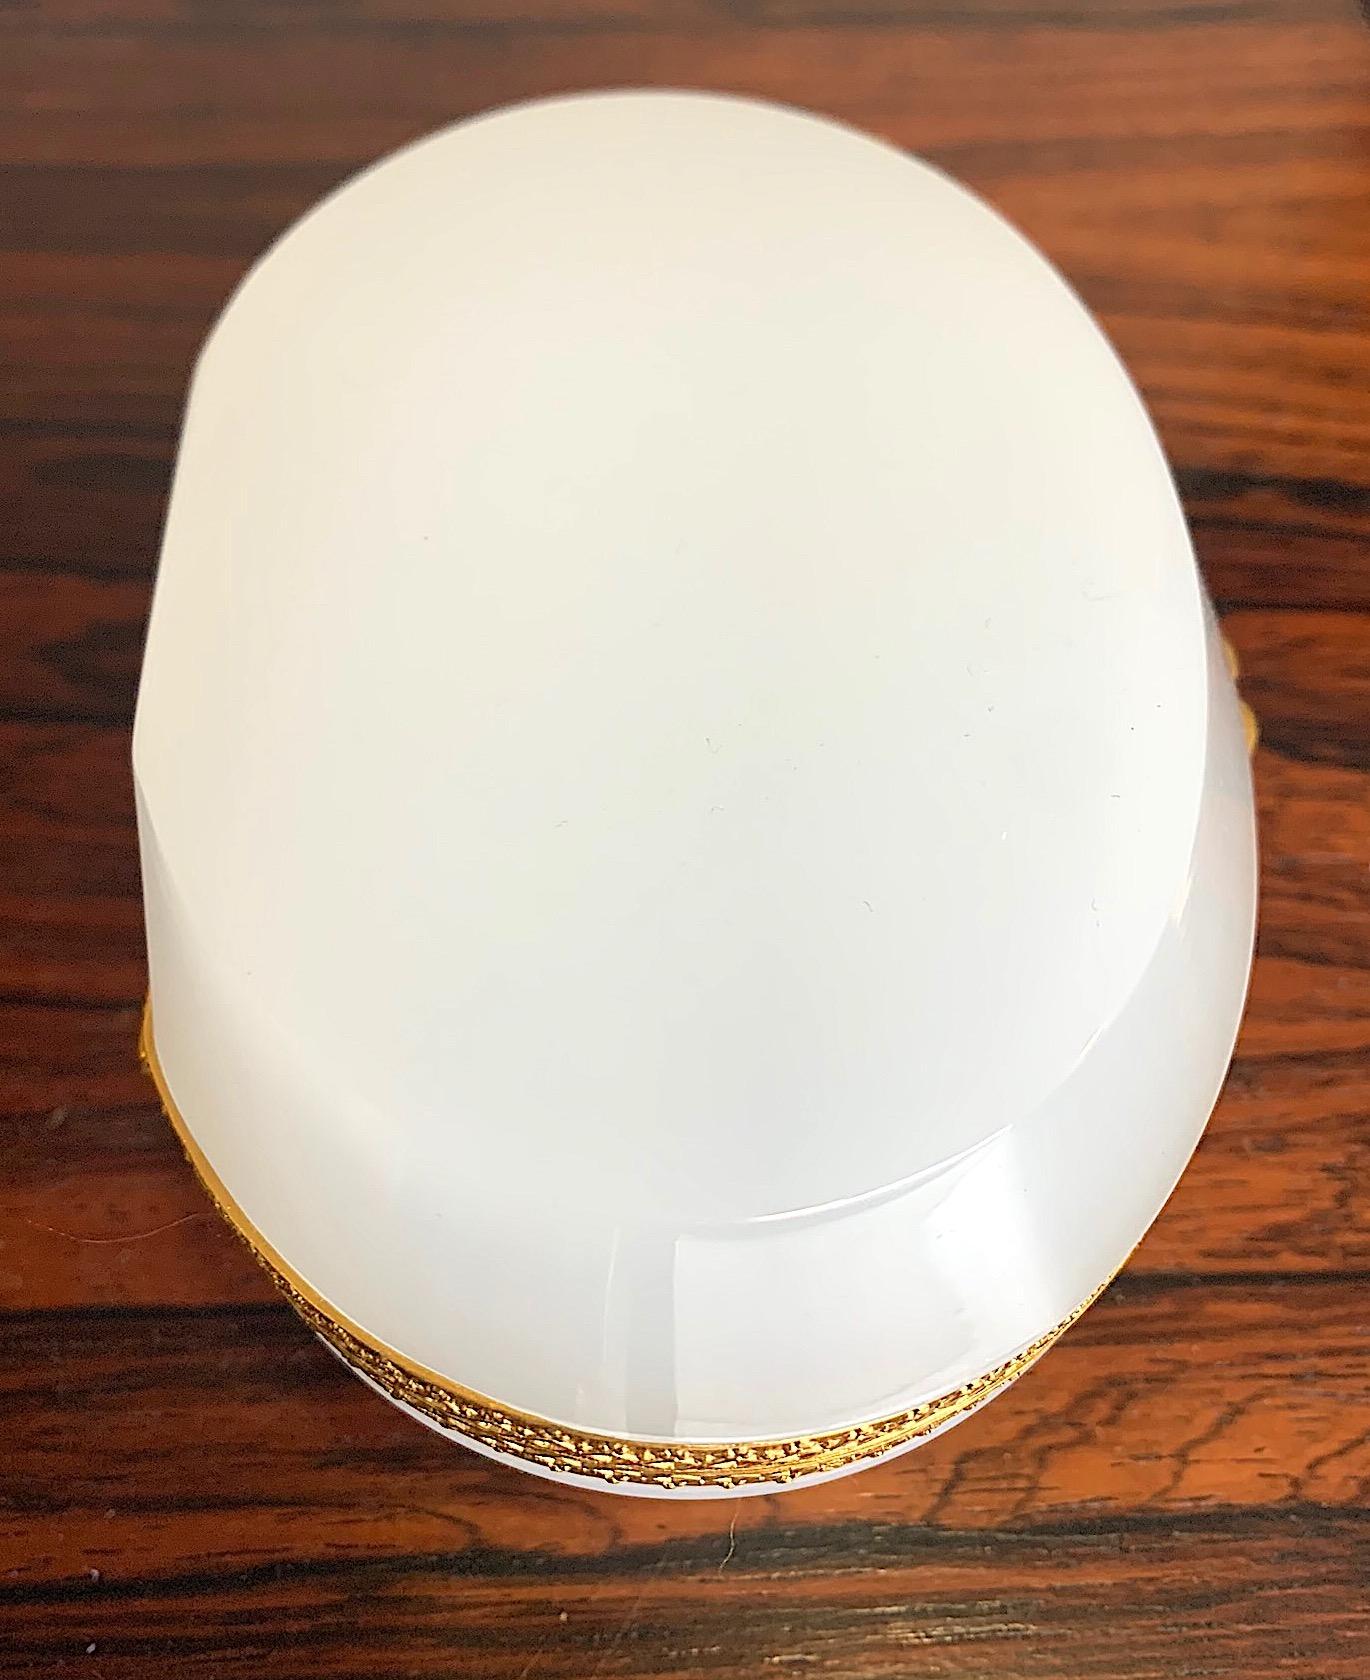 Mid-20th Century Stunning 1950s White Murano Glass Hinged Jewelry Box by Cendese Murano, Italy For Sale